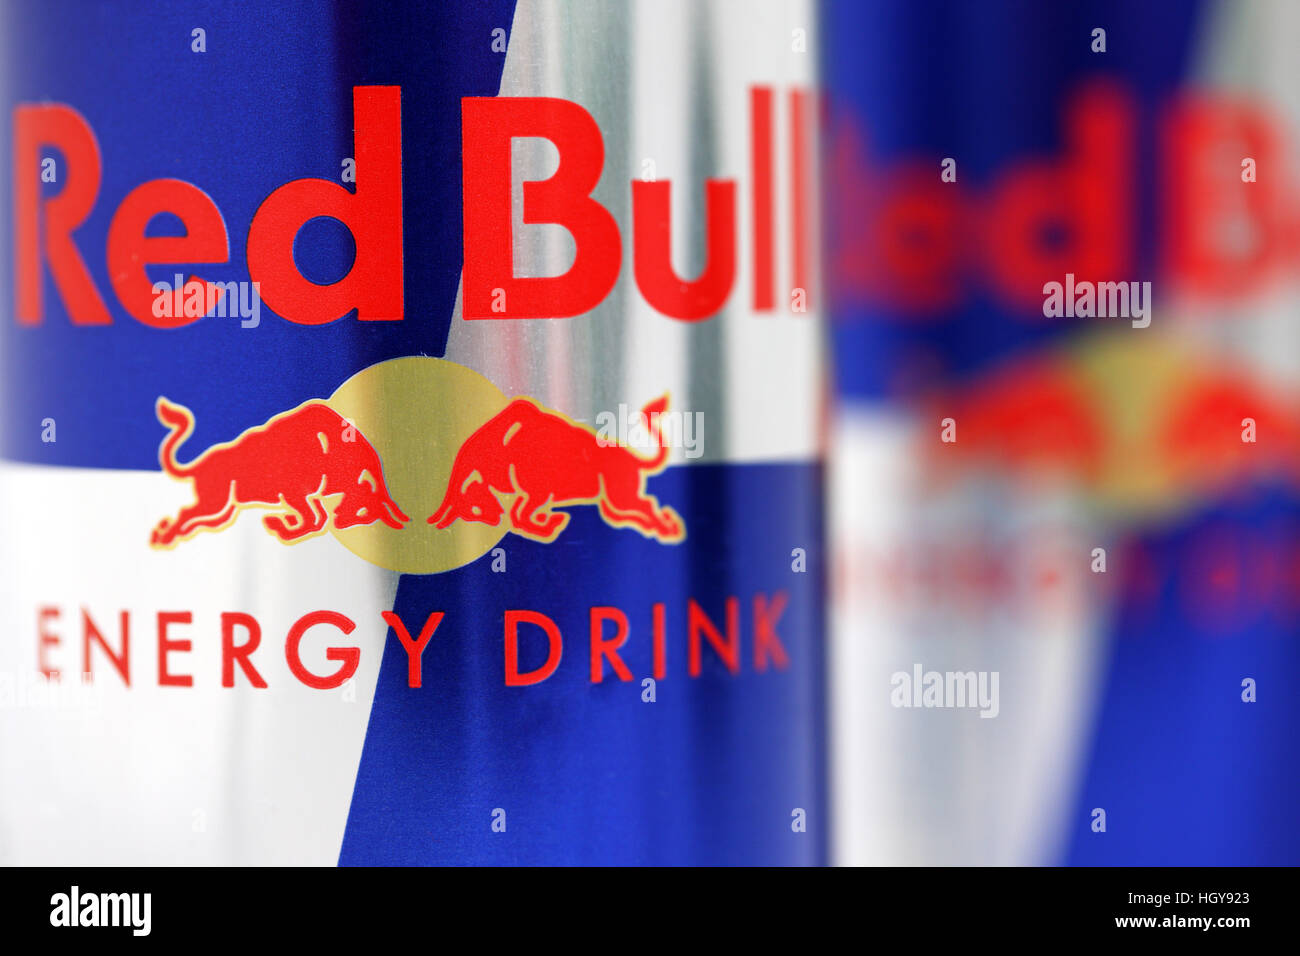 Red Bull Energy Drink High Resolution Stock Photography and Images - Alamy